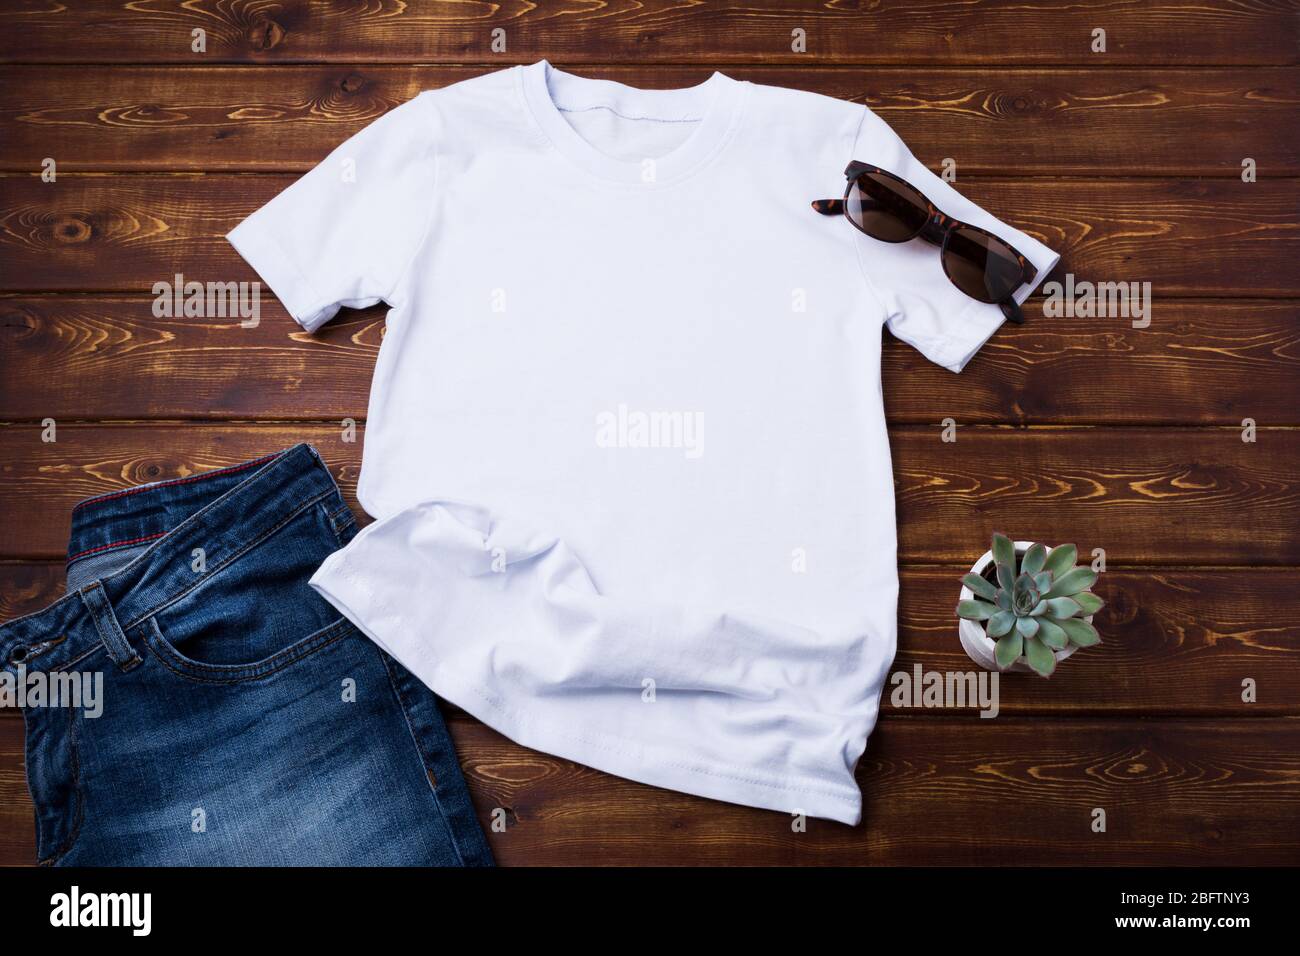 White unisex cotton T-shirt rustic mockup with sunglasses, jeans and succulent plant. Design t shirt template, tee print presentation mock up Stock Photo